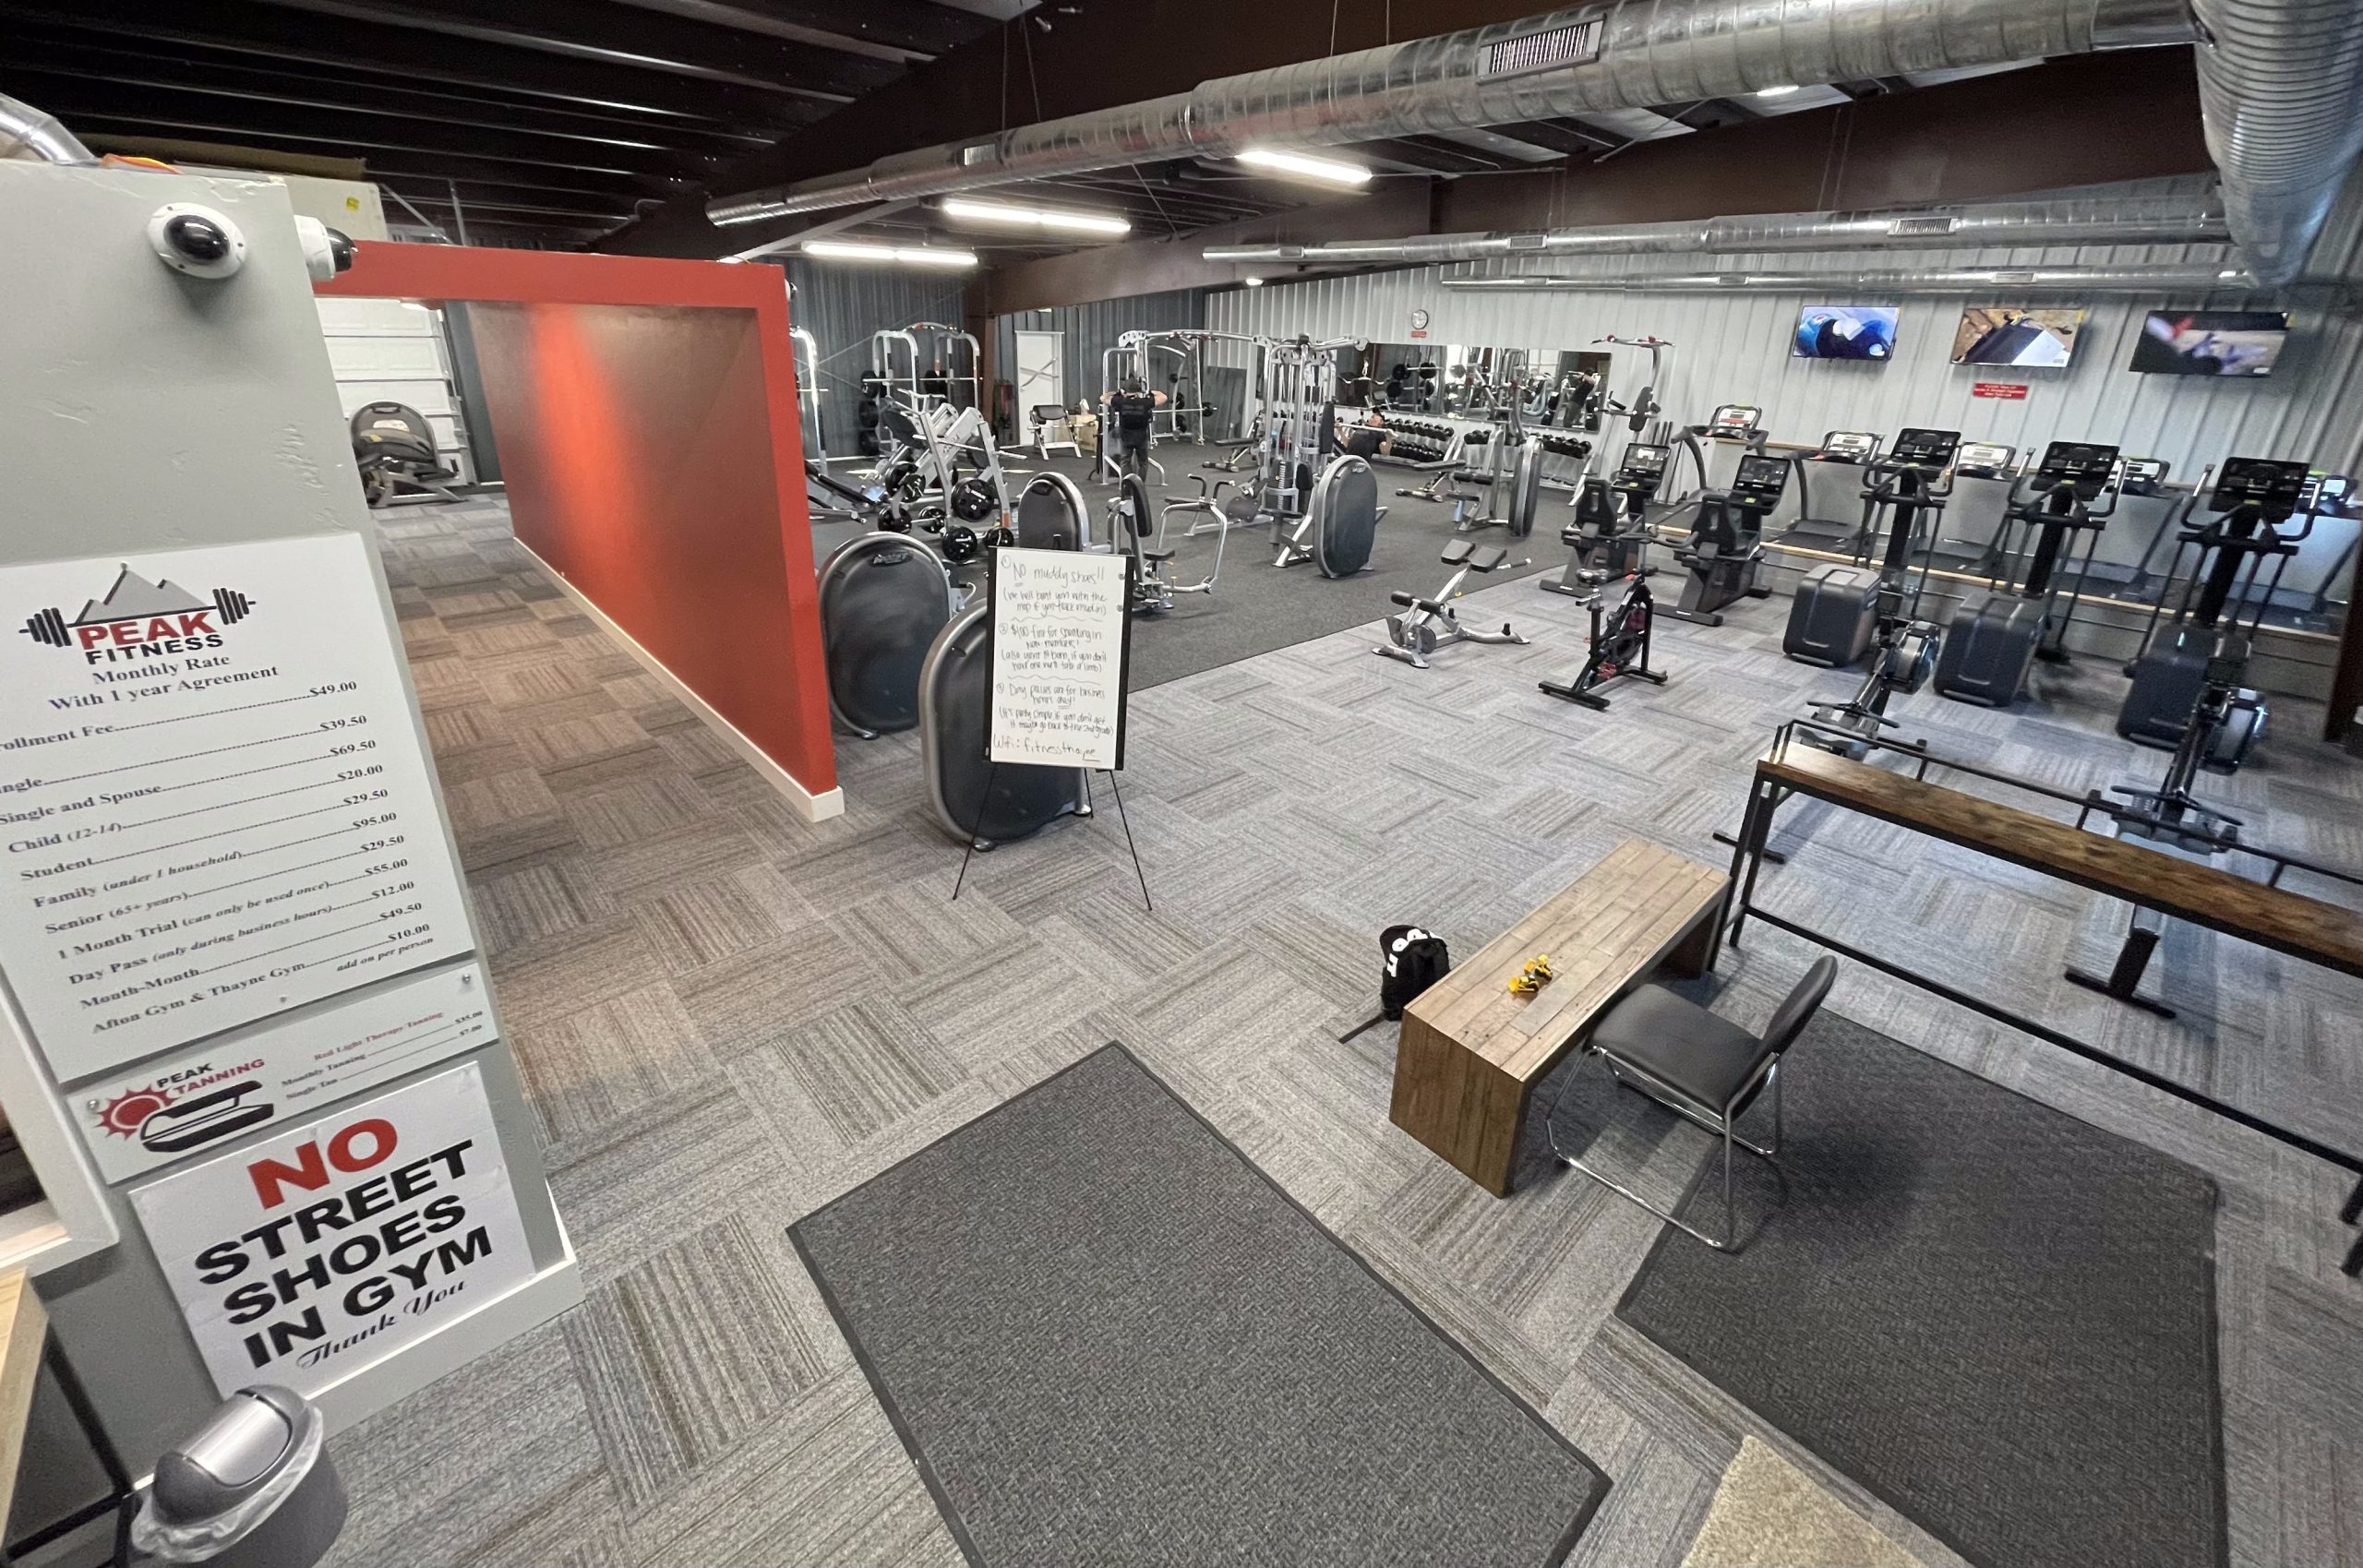 image of exercise equipment at Peak Fitness Thayne, WY location